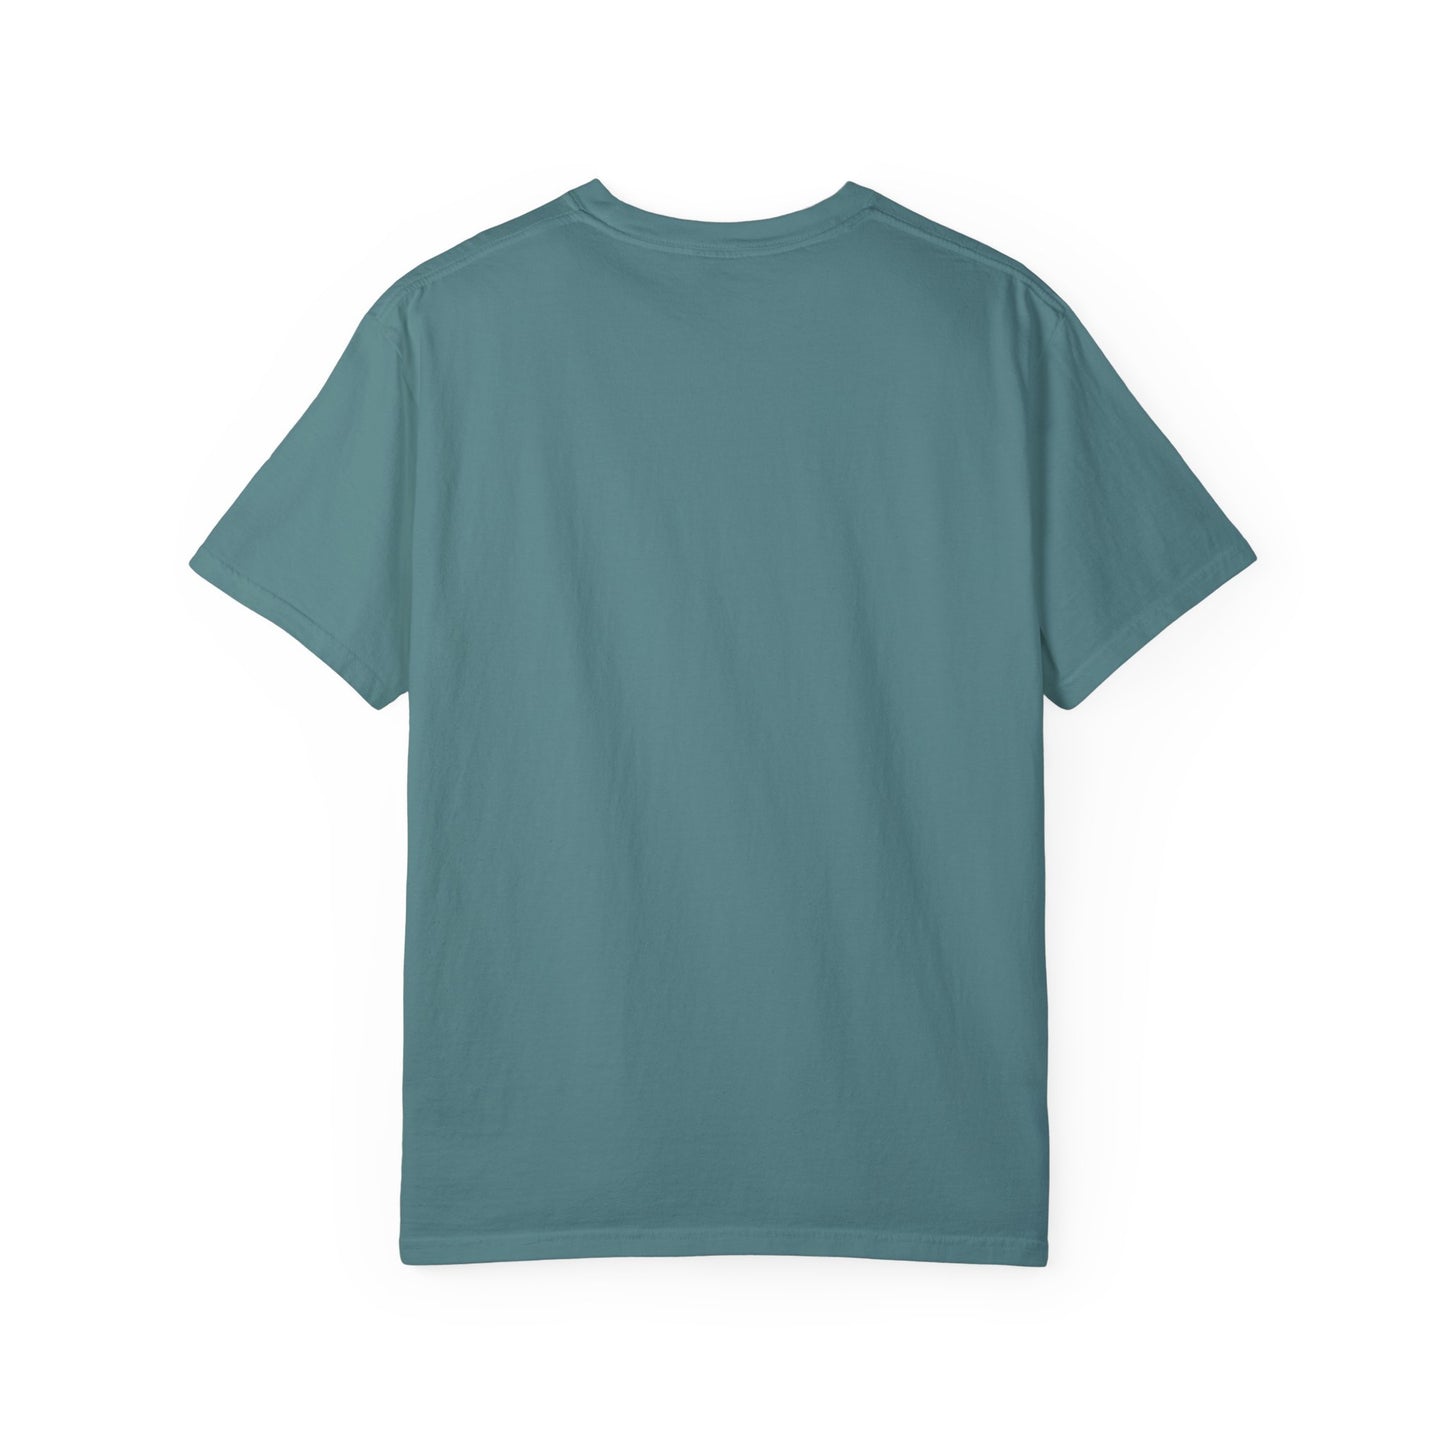 Less is More Garment-Dyed T-shirt